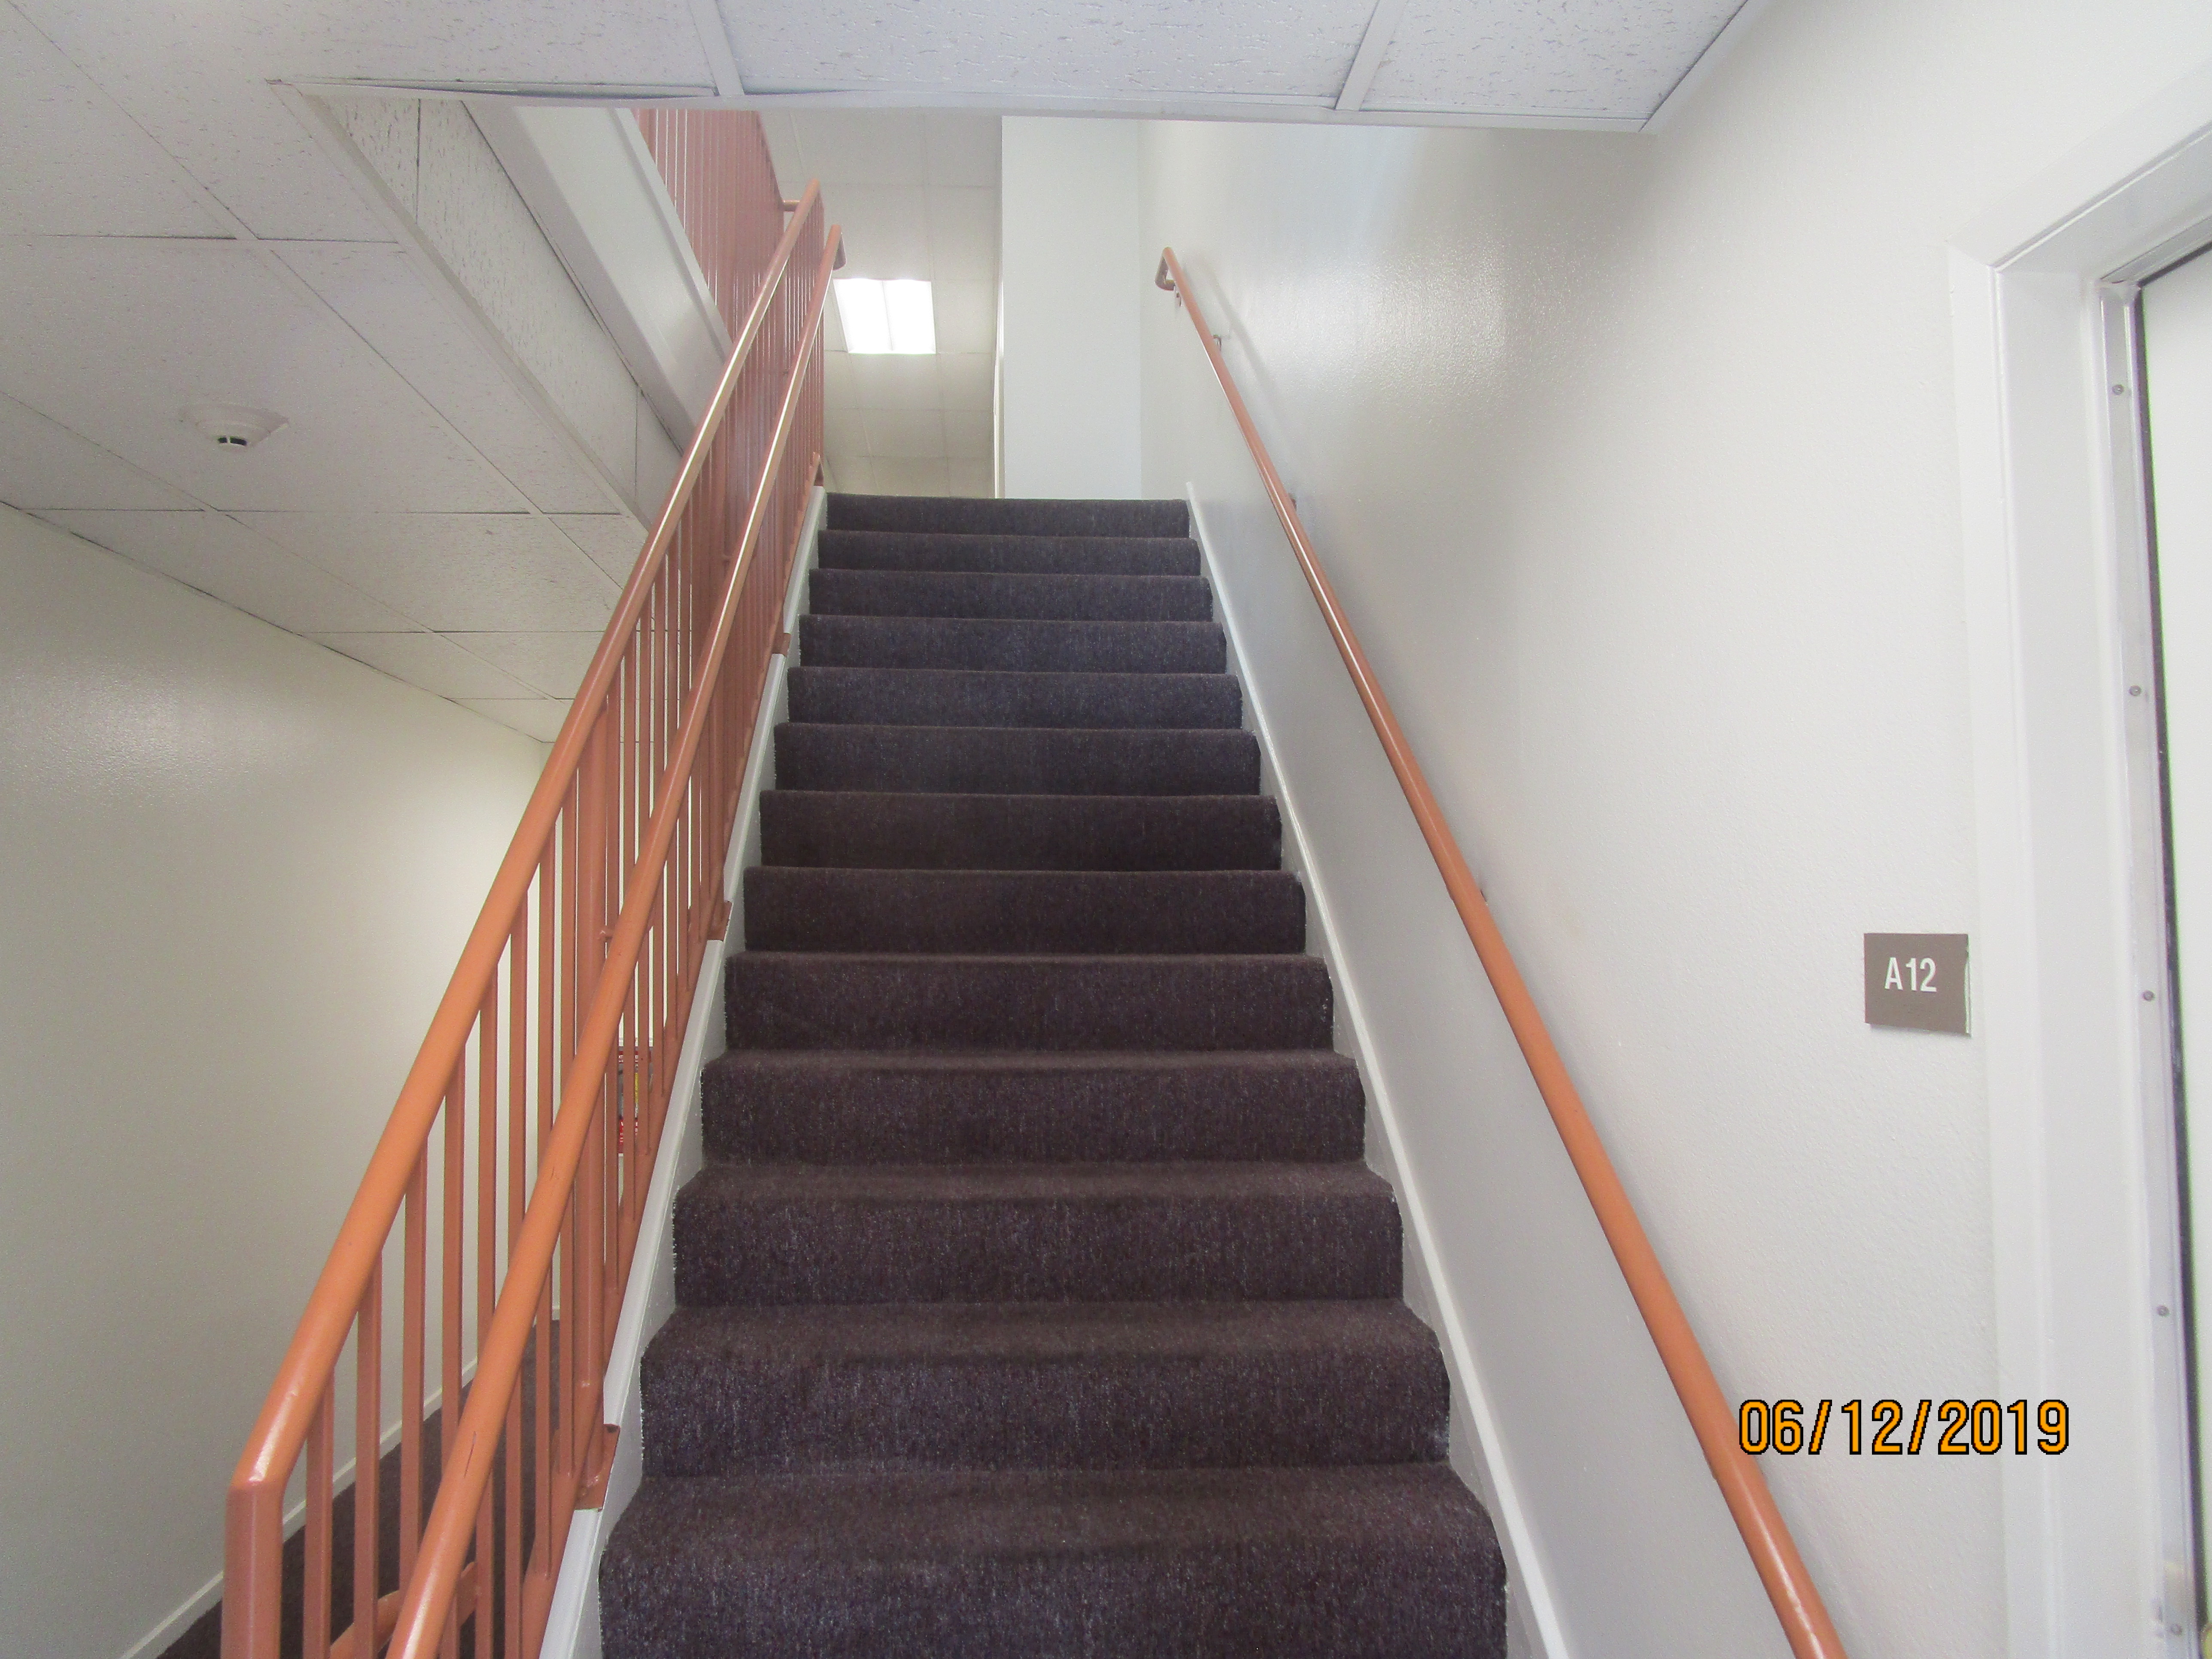 View of the carpeted staircase with orange handrails